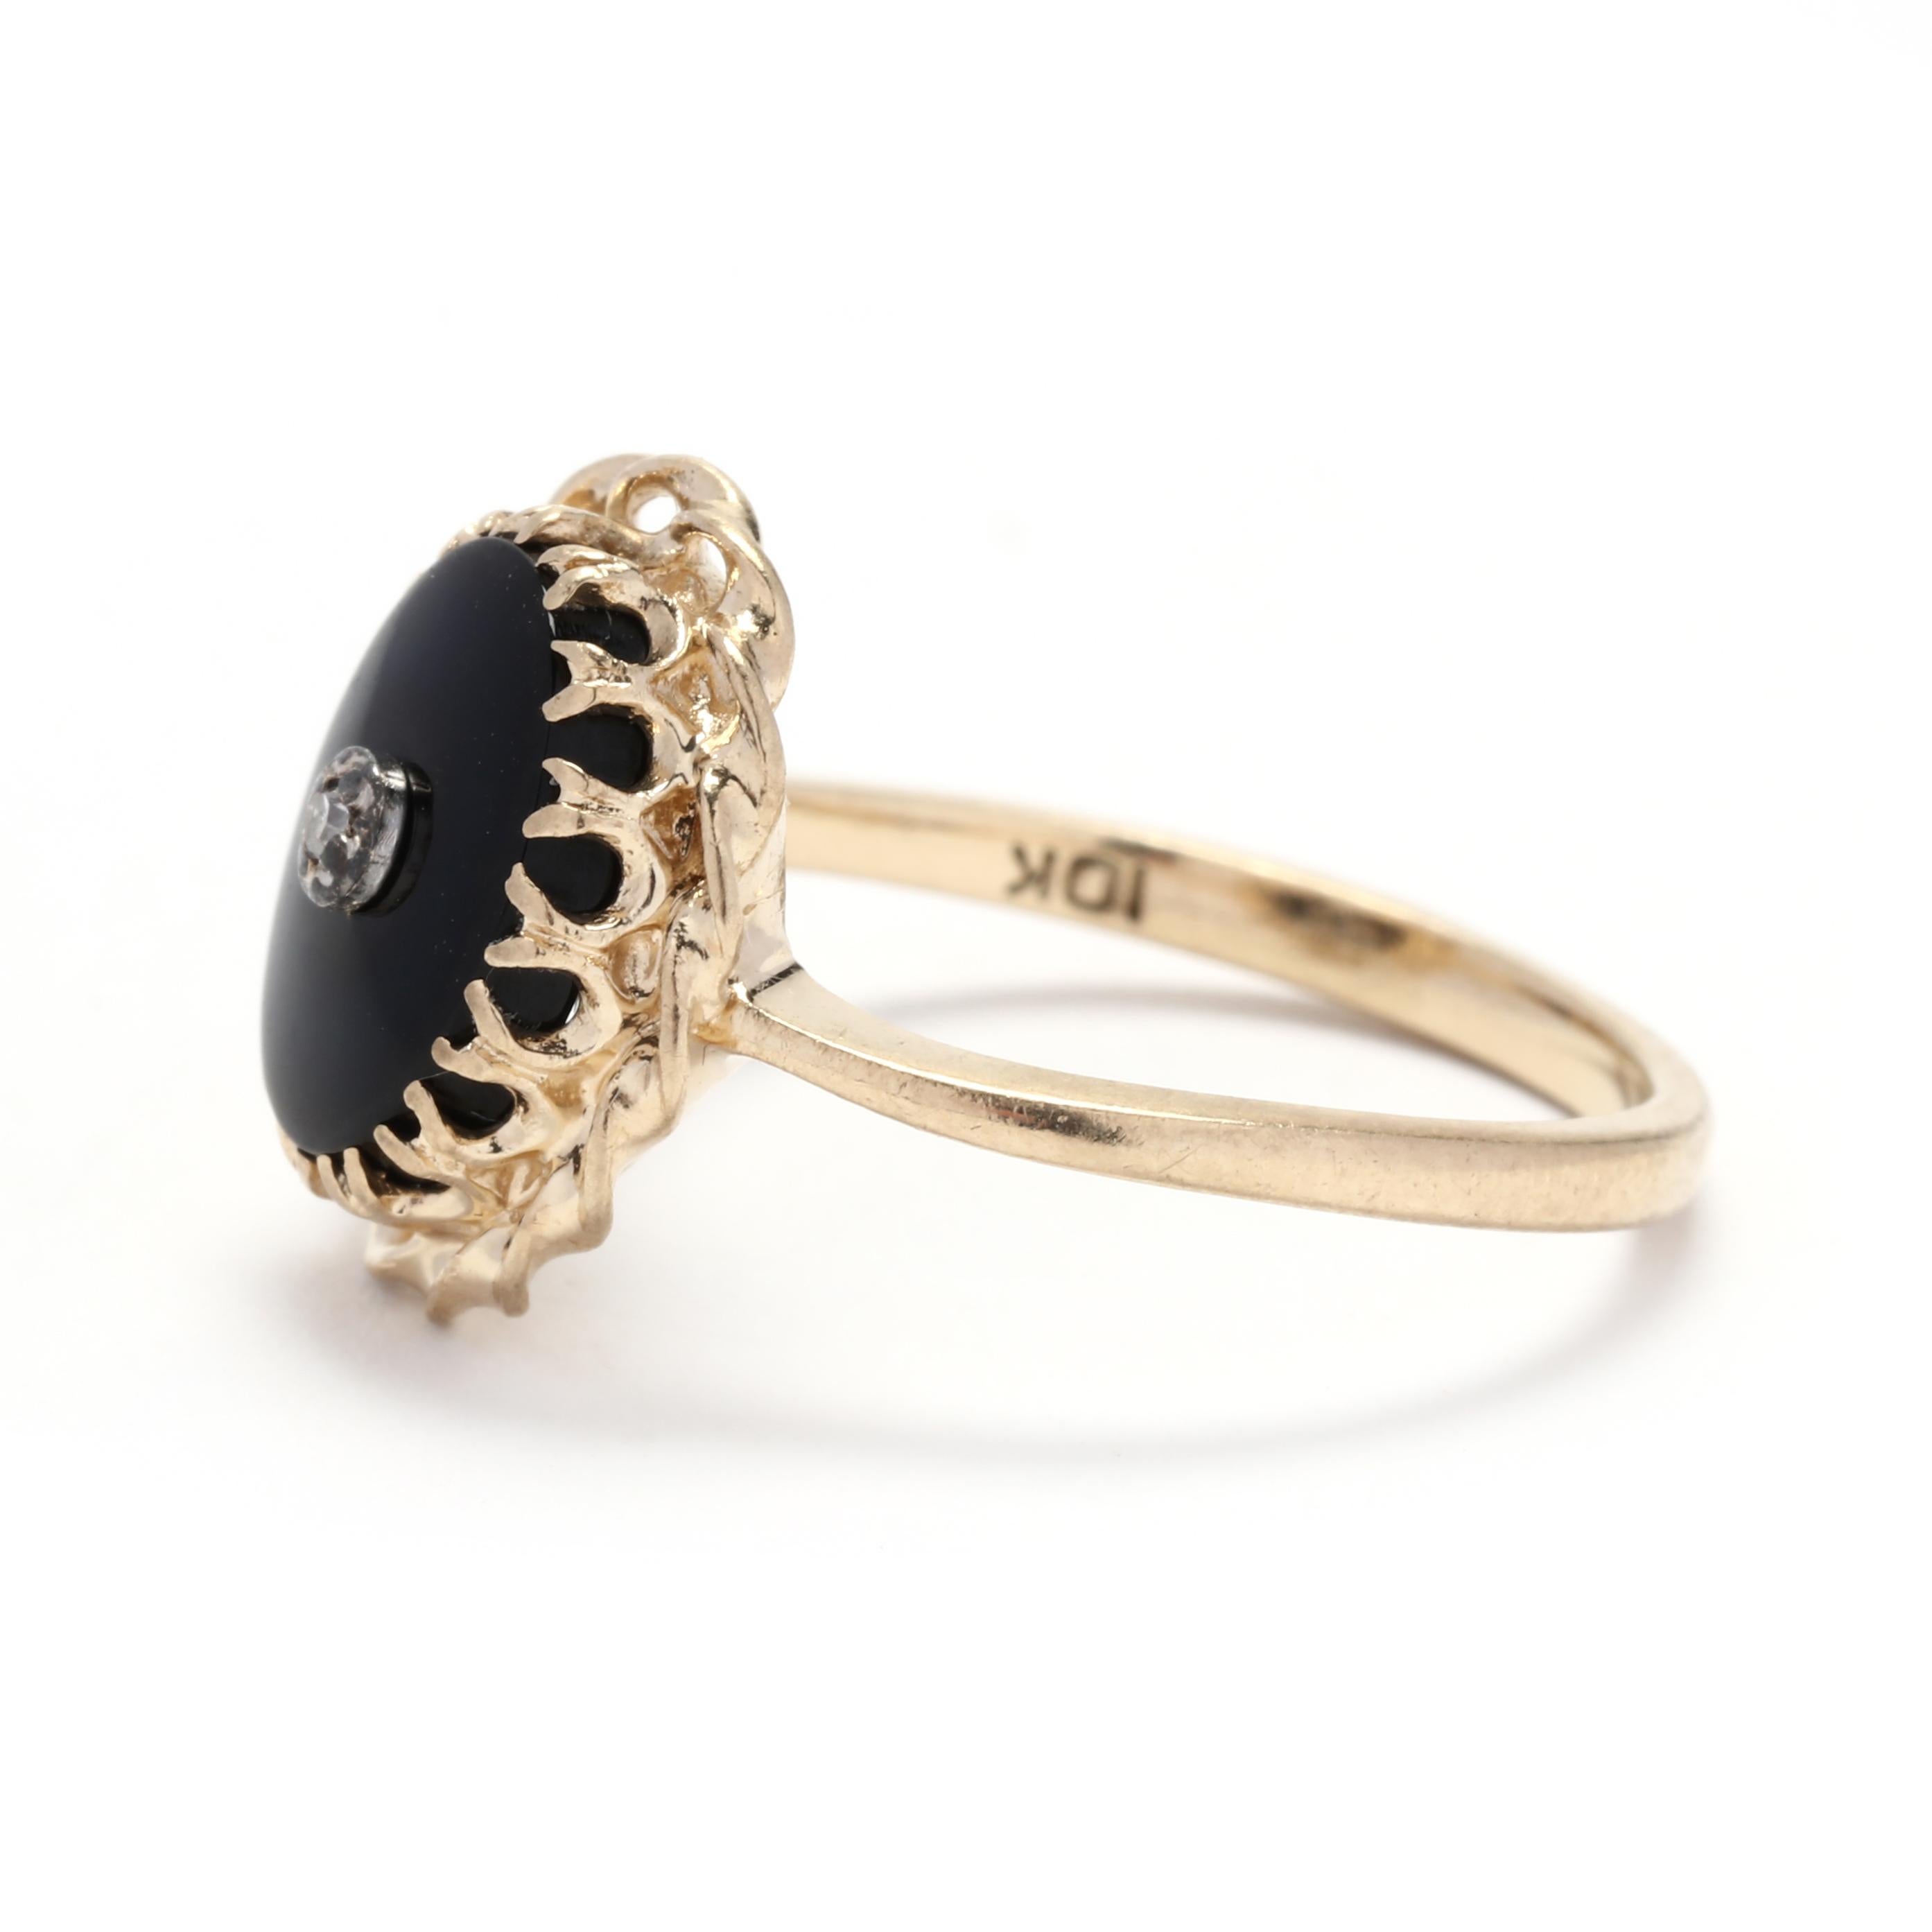 Diamond and Black Onyx Oval Ring, 10k Yellow Gold, Ring Size 5.5, Fancy Ring  In Good Condition For Sale In McLeansville, NC